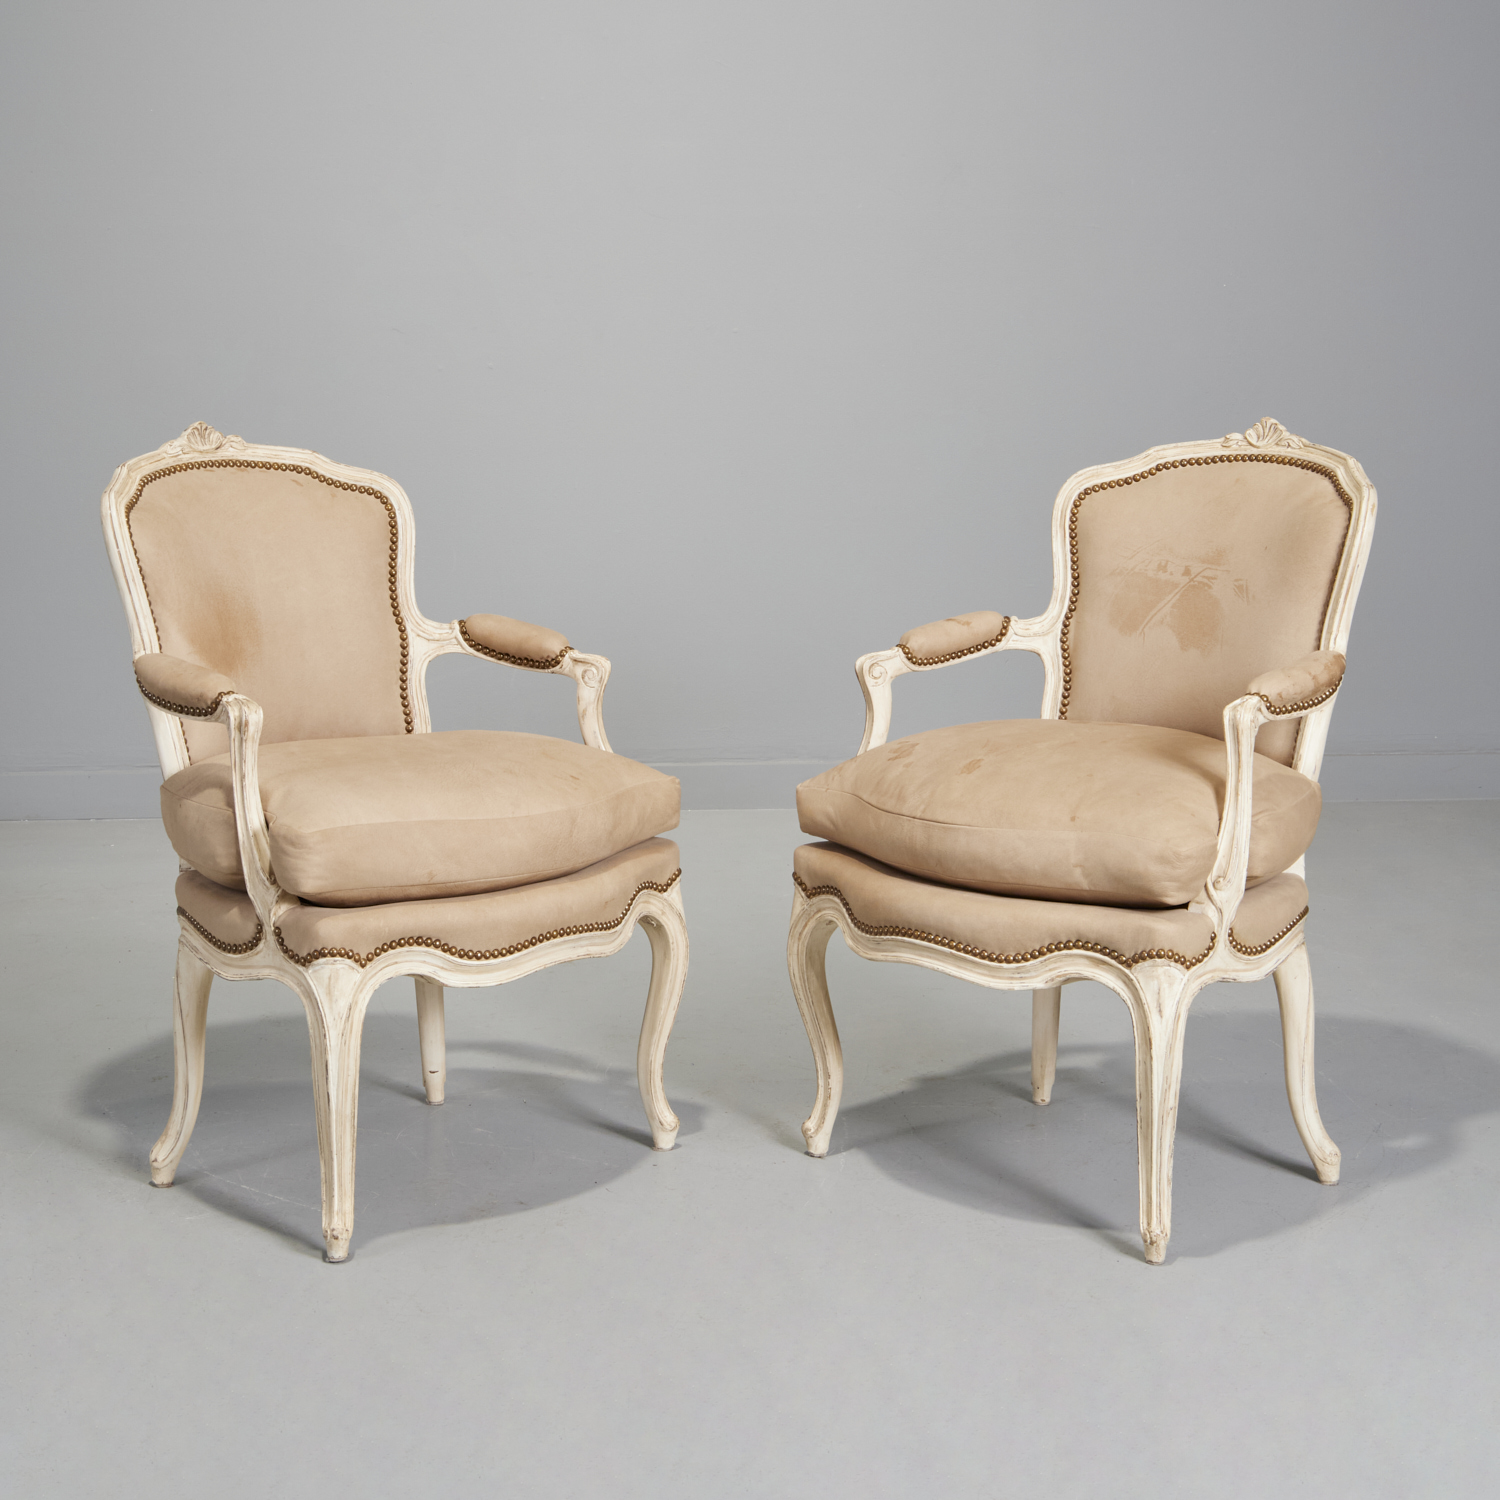 NICE PAIR LOUIS XV STYLE PAINTED 360d97